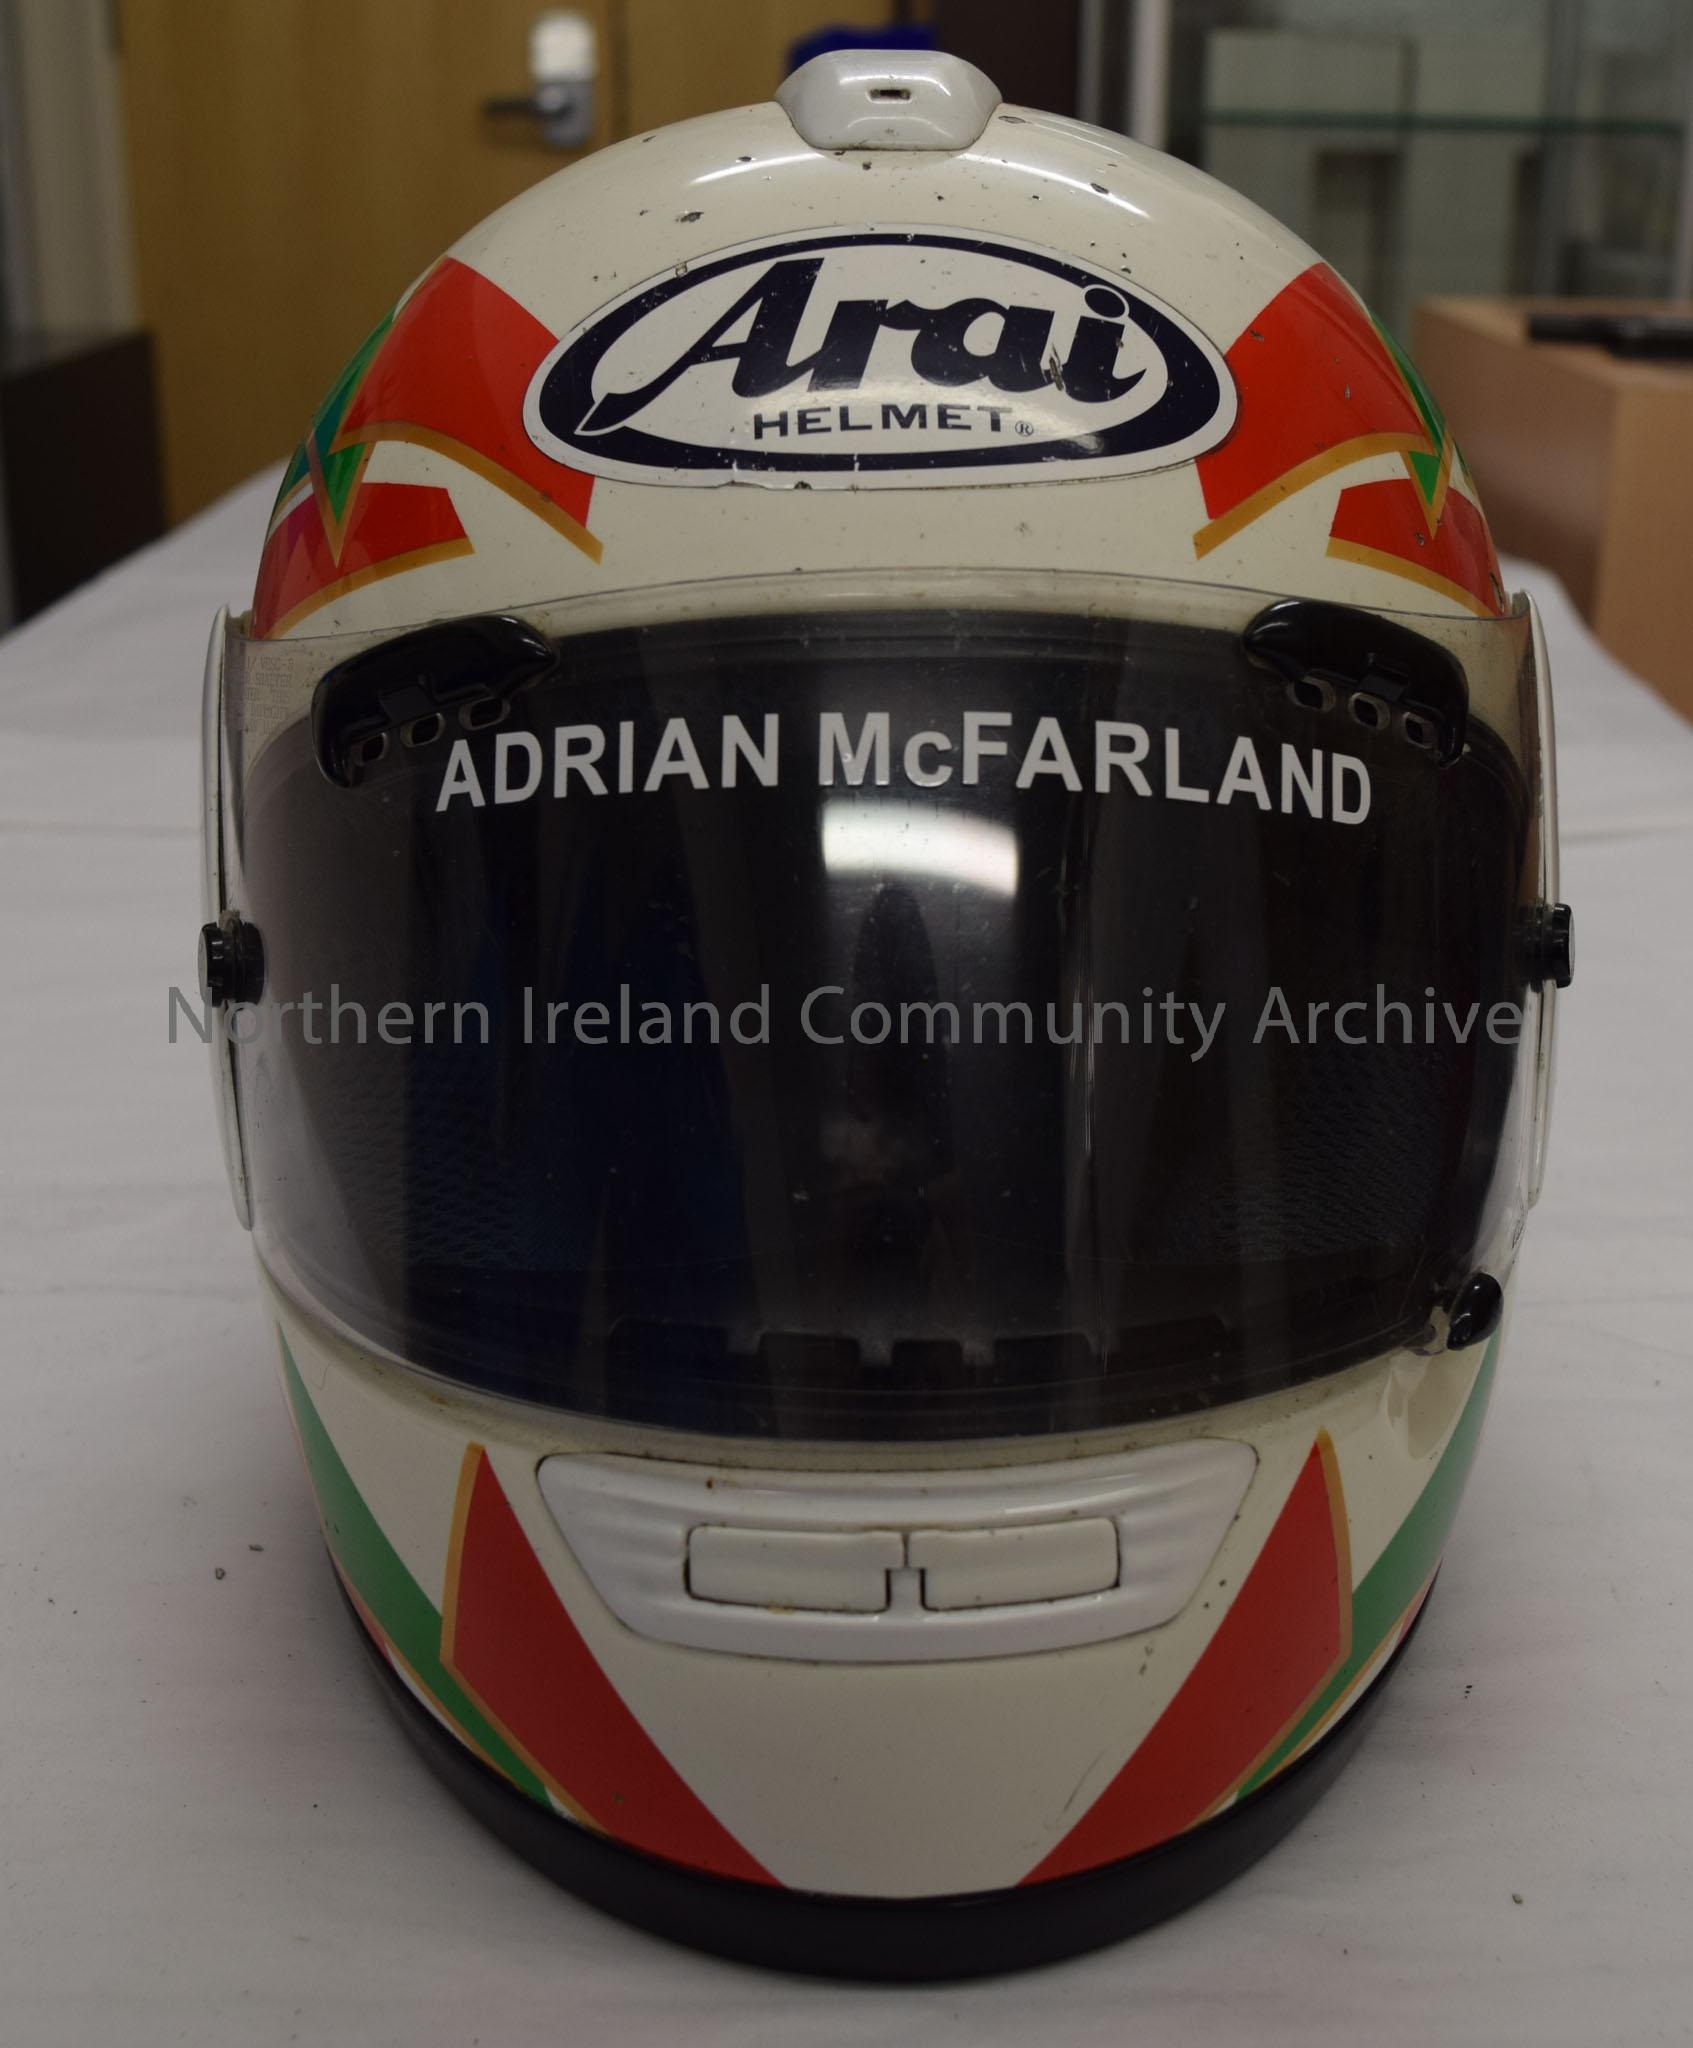 Arai motorcycle helmet belonging to Adrian McFarland. White helmet with red and green trapezium shape pattern with gold borders. – 2016.67 (2)